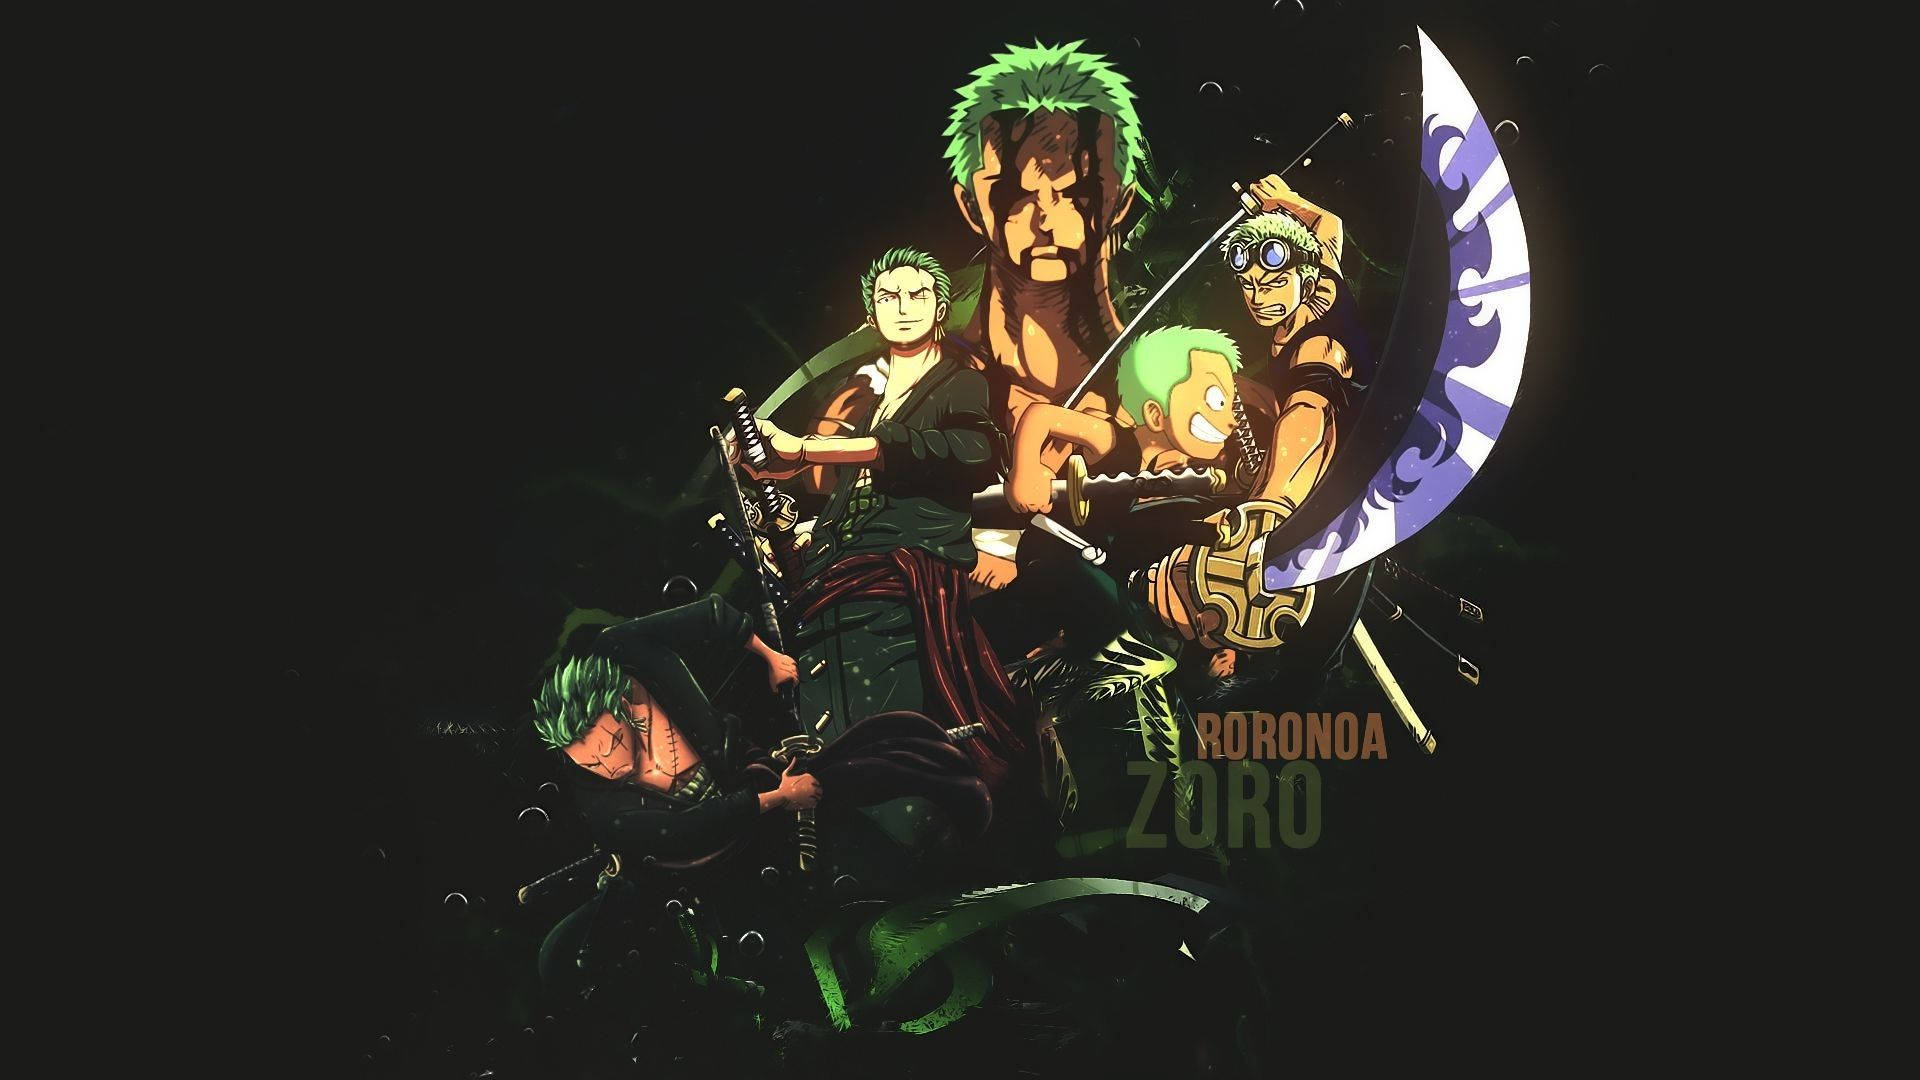 Follow Zoro on his travels as he works to become the world’s greatest swordsman. Wallpaper